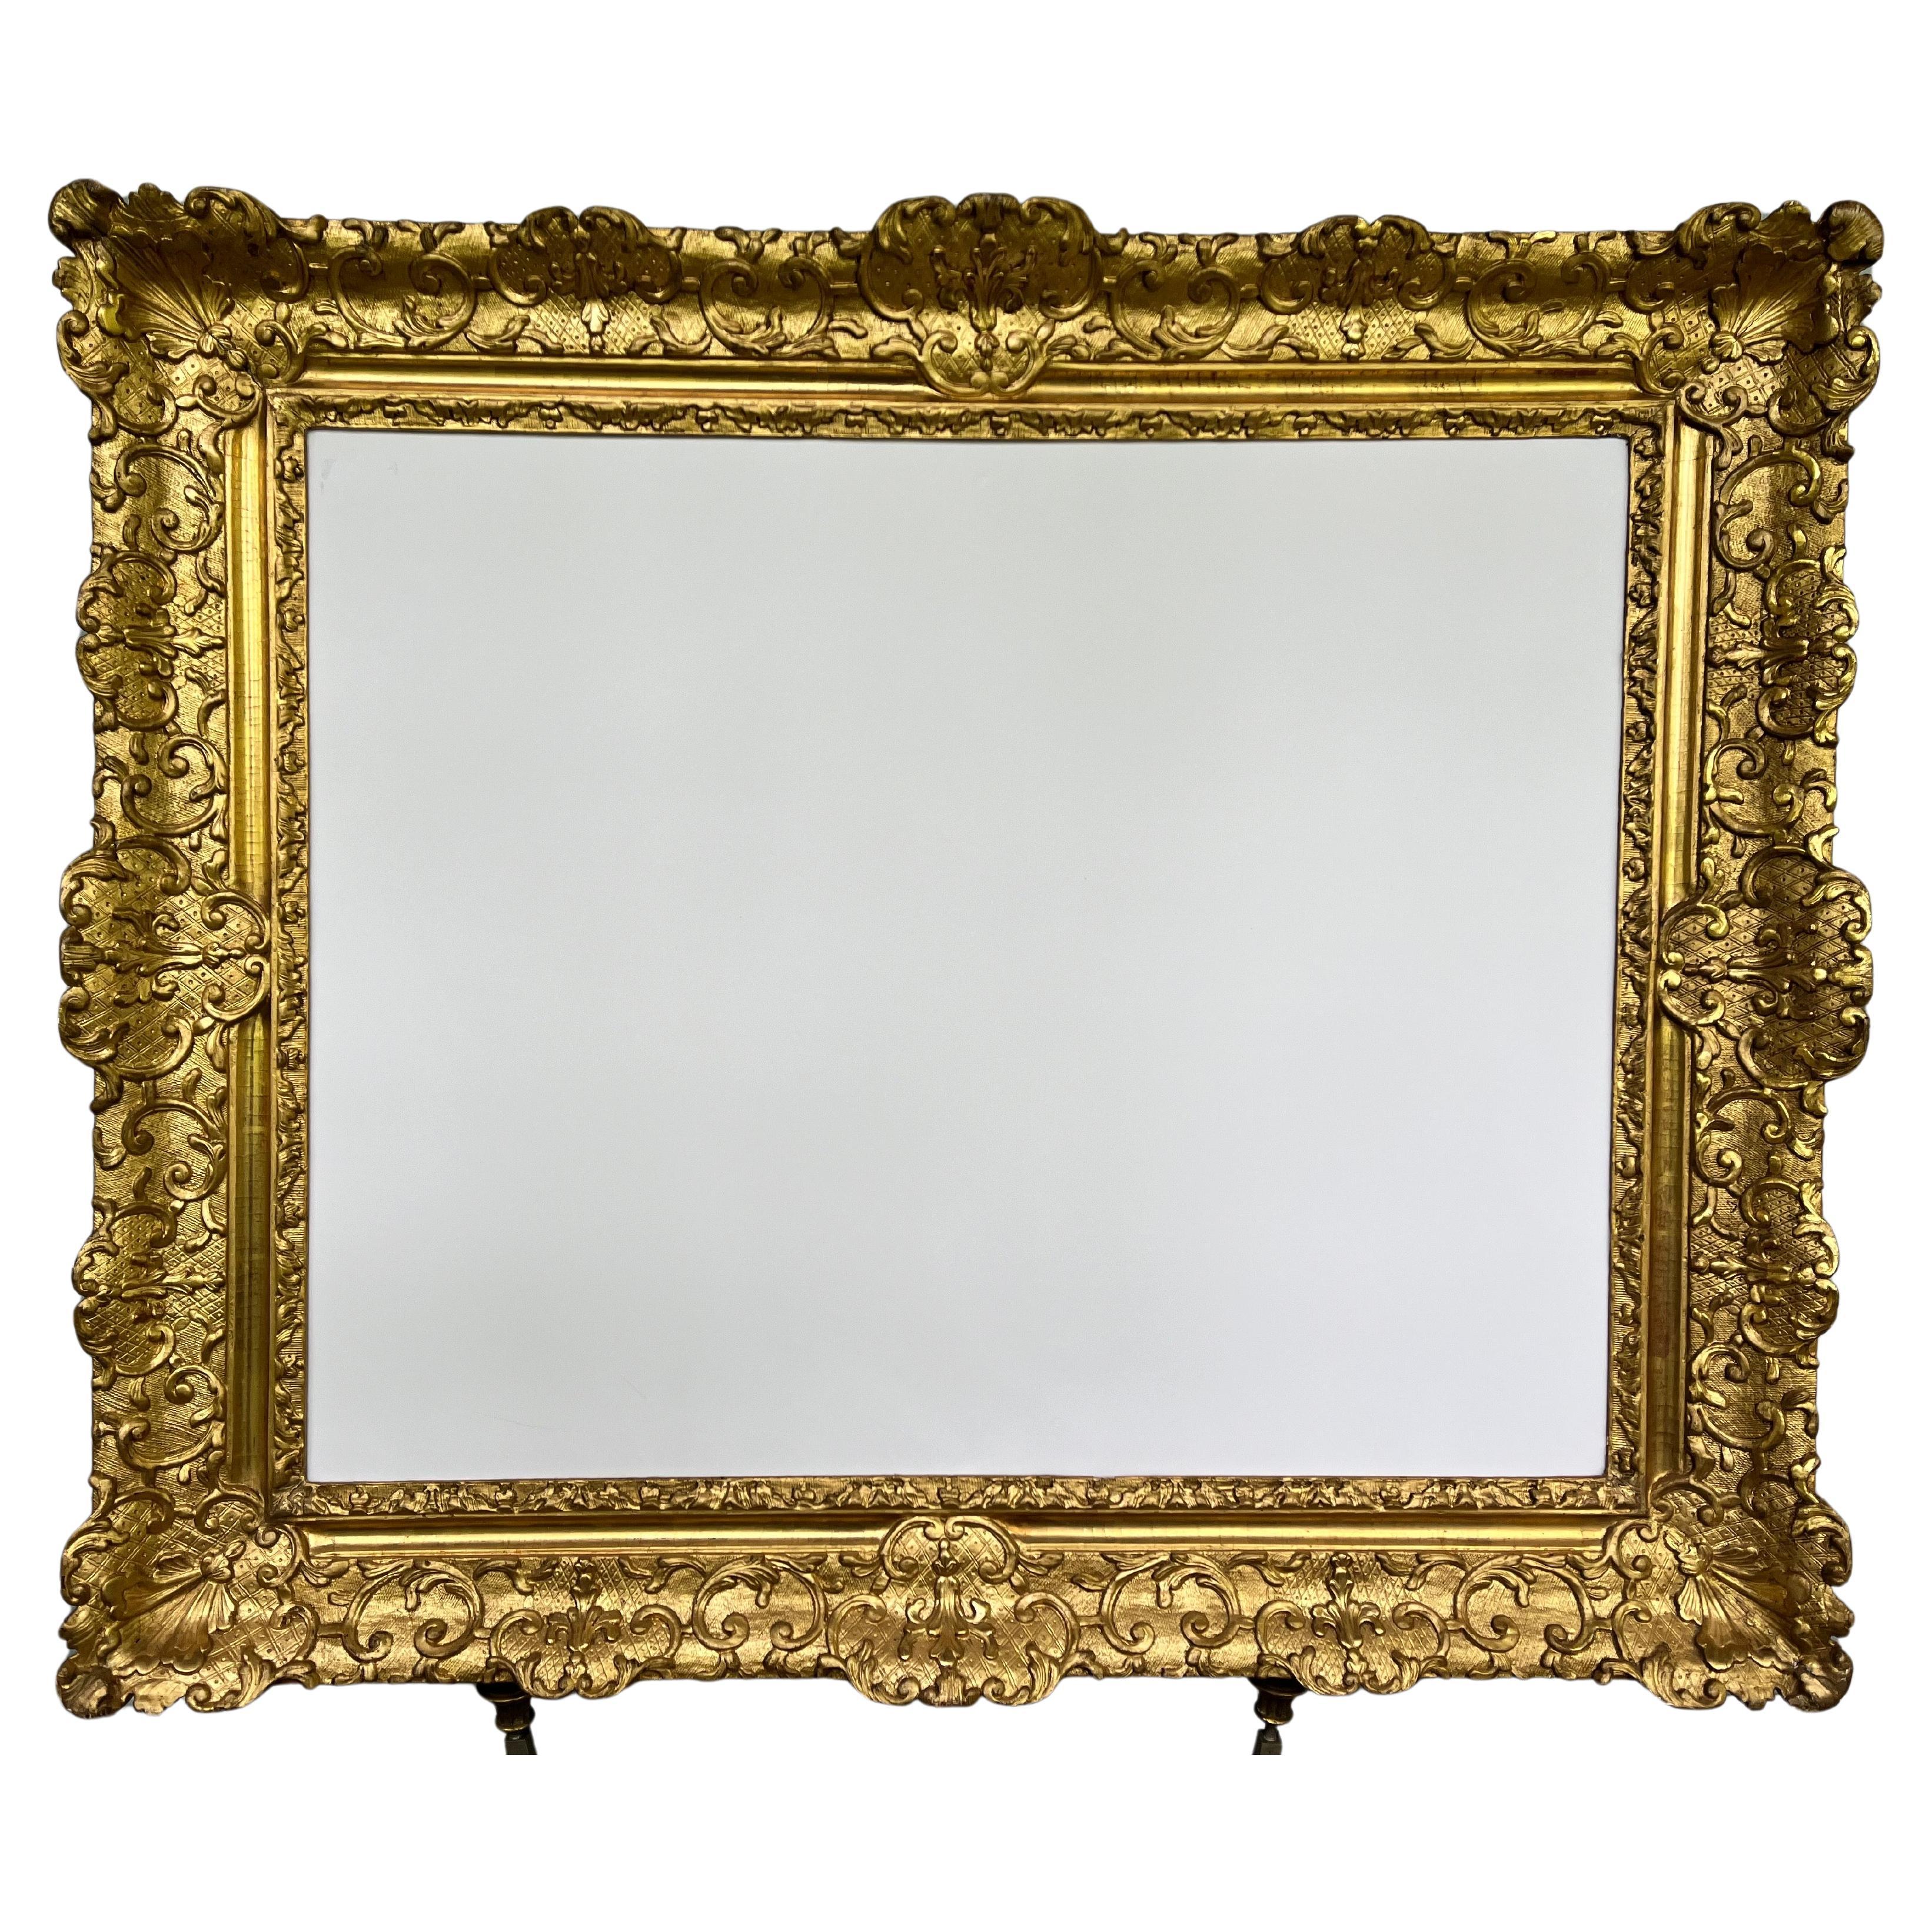 19th Century Louis Style French Painting or Picture Frame Christie’s Provenance